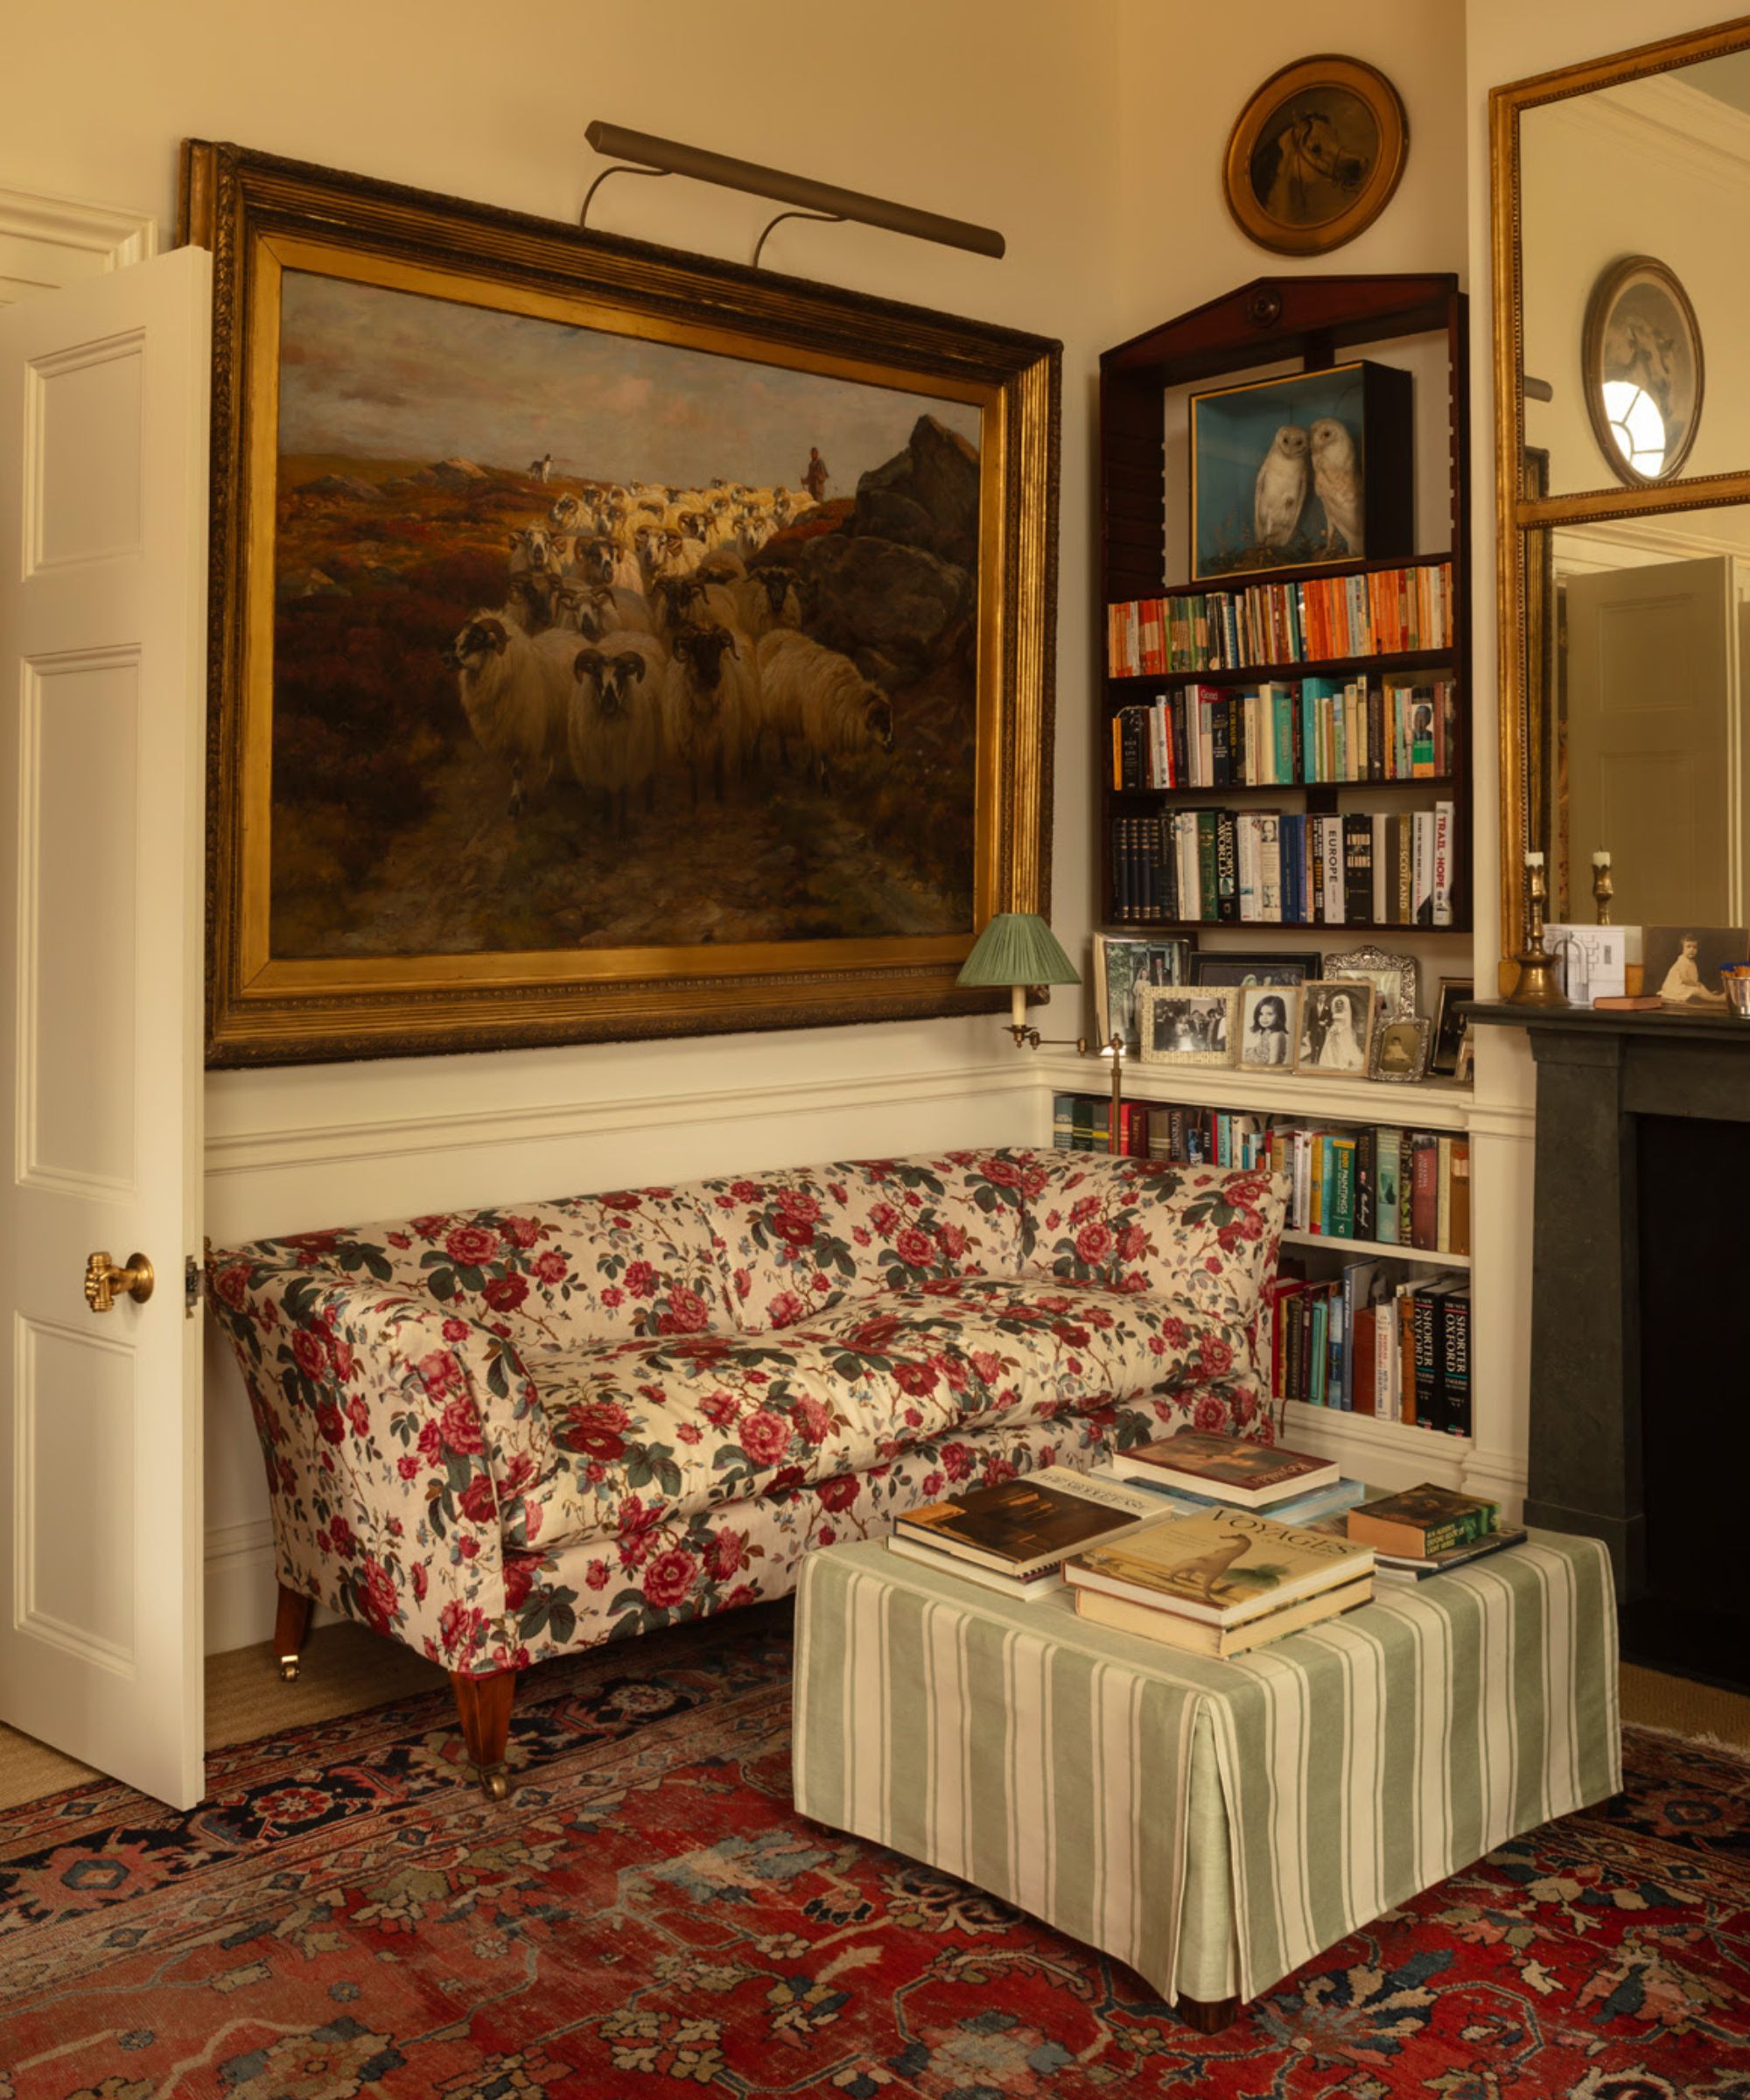 Cozy corner of a living room with floral sofa, striped ottoman, artwork on wall